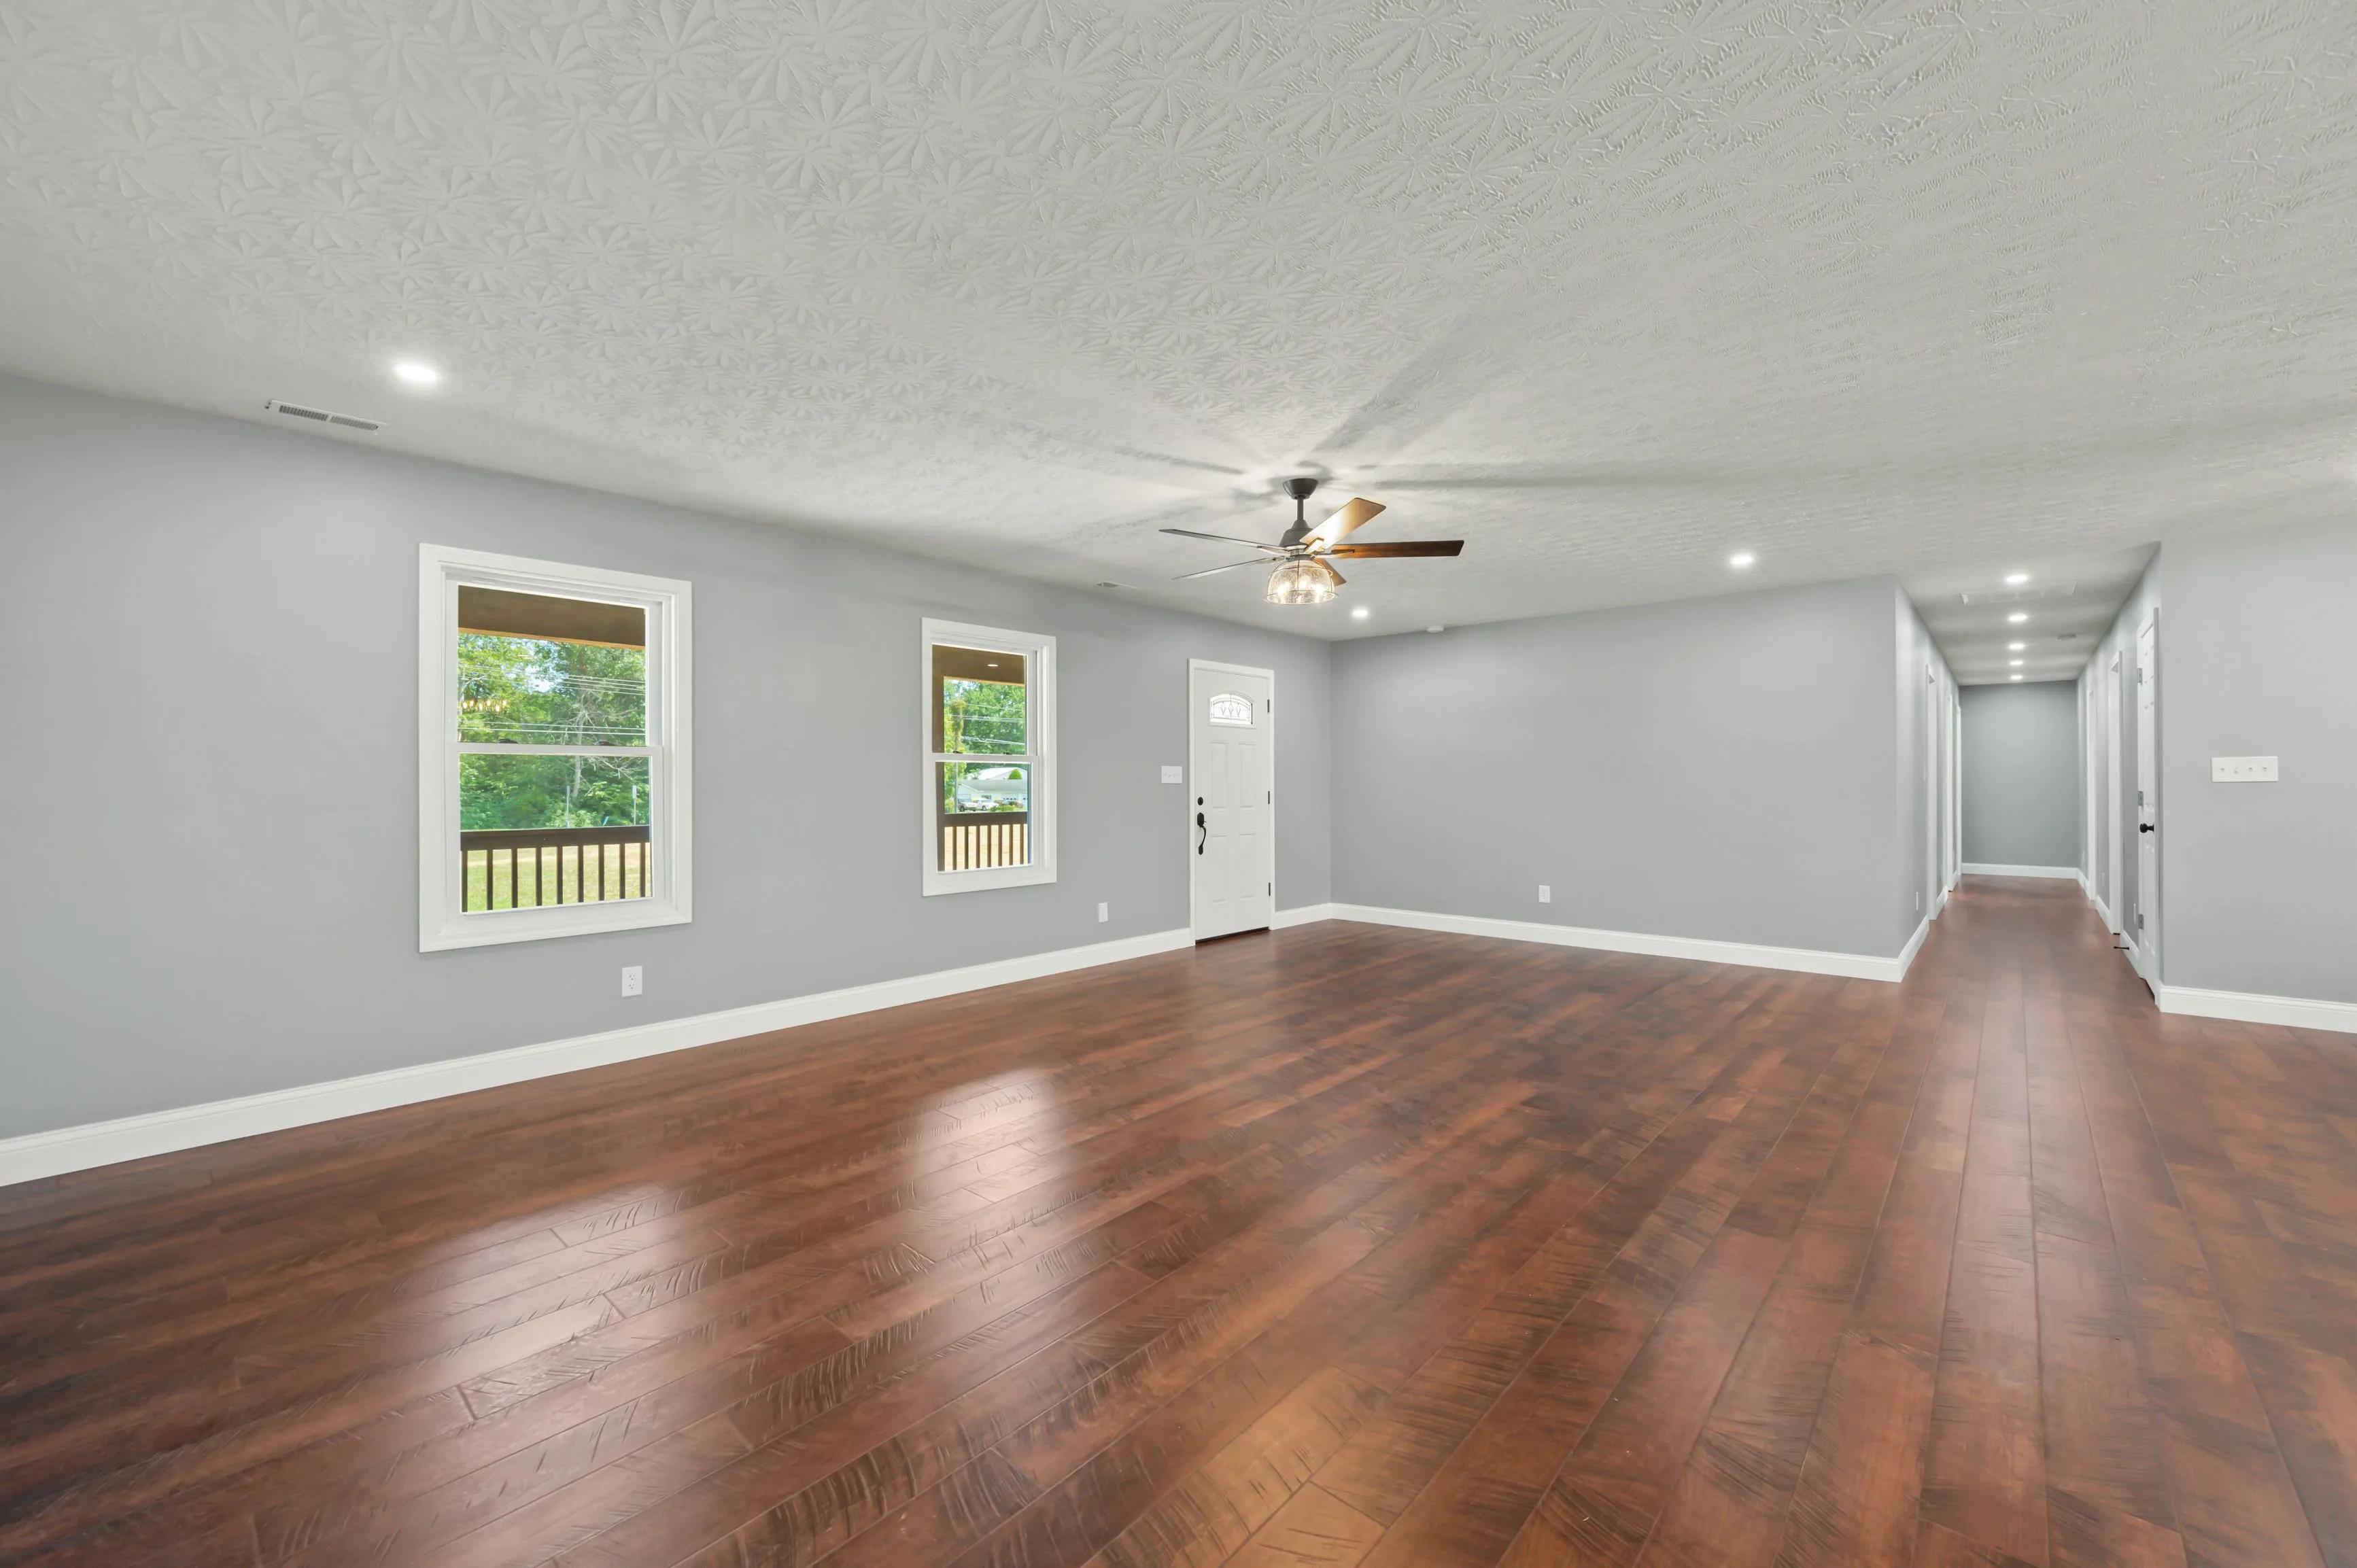 Empty room with polished wooden floor, light gray walls, white ceiling with textured pattern, ceiling fan, two windows and a door leading outside.